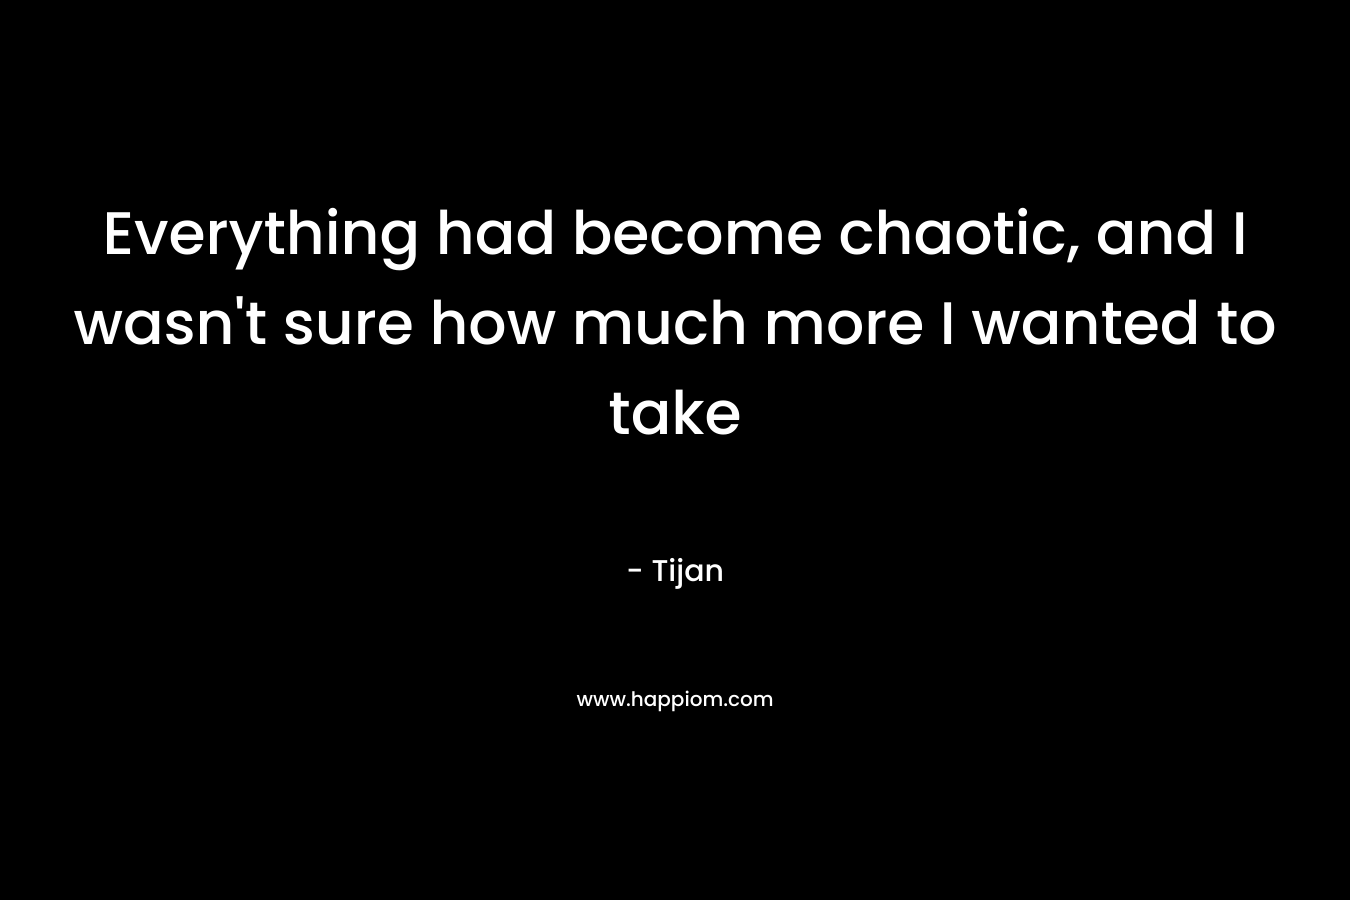 Everything had become chaotic, and I wasn’t sure how much more I wanted to take – Tijan